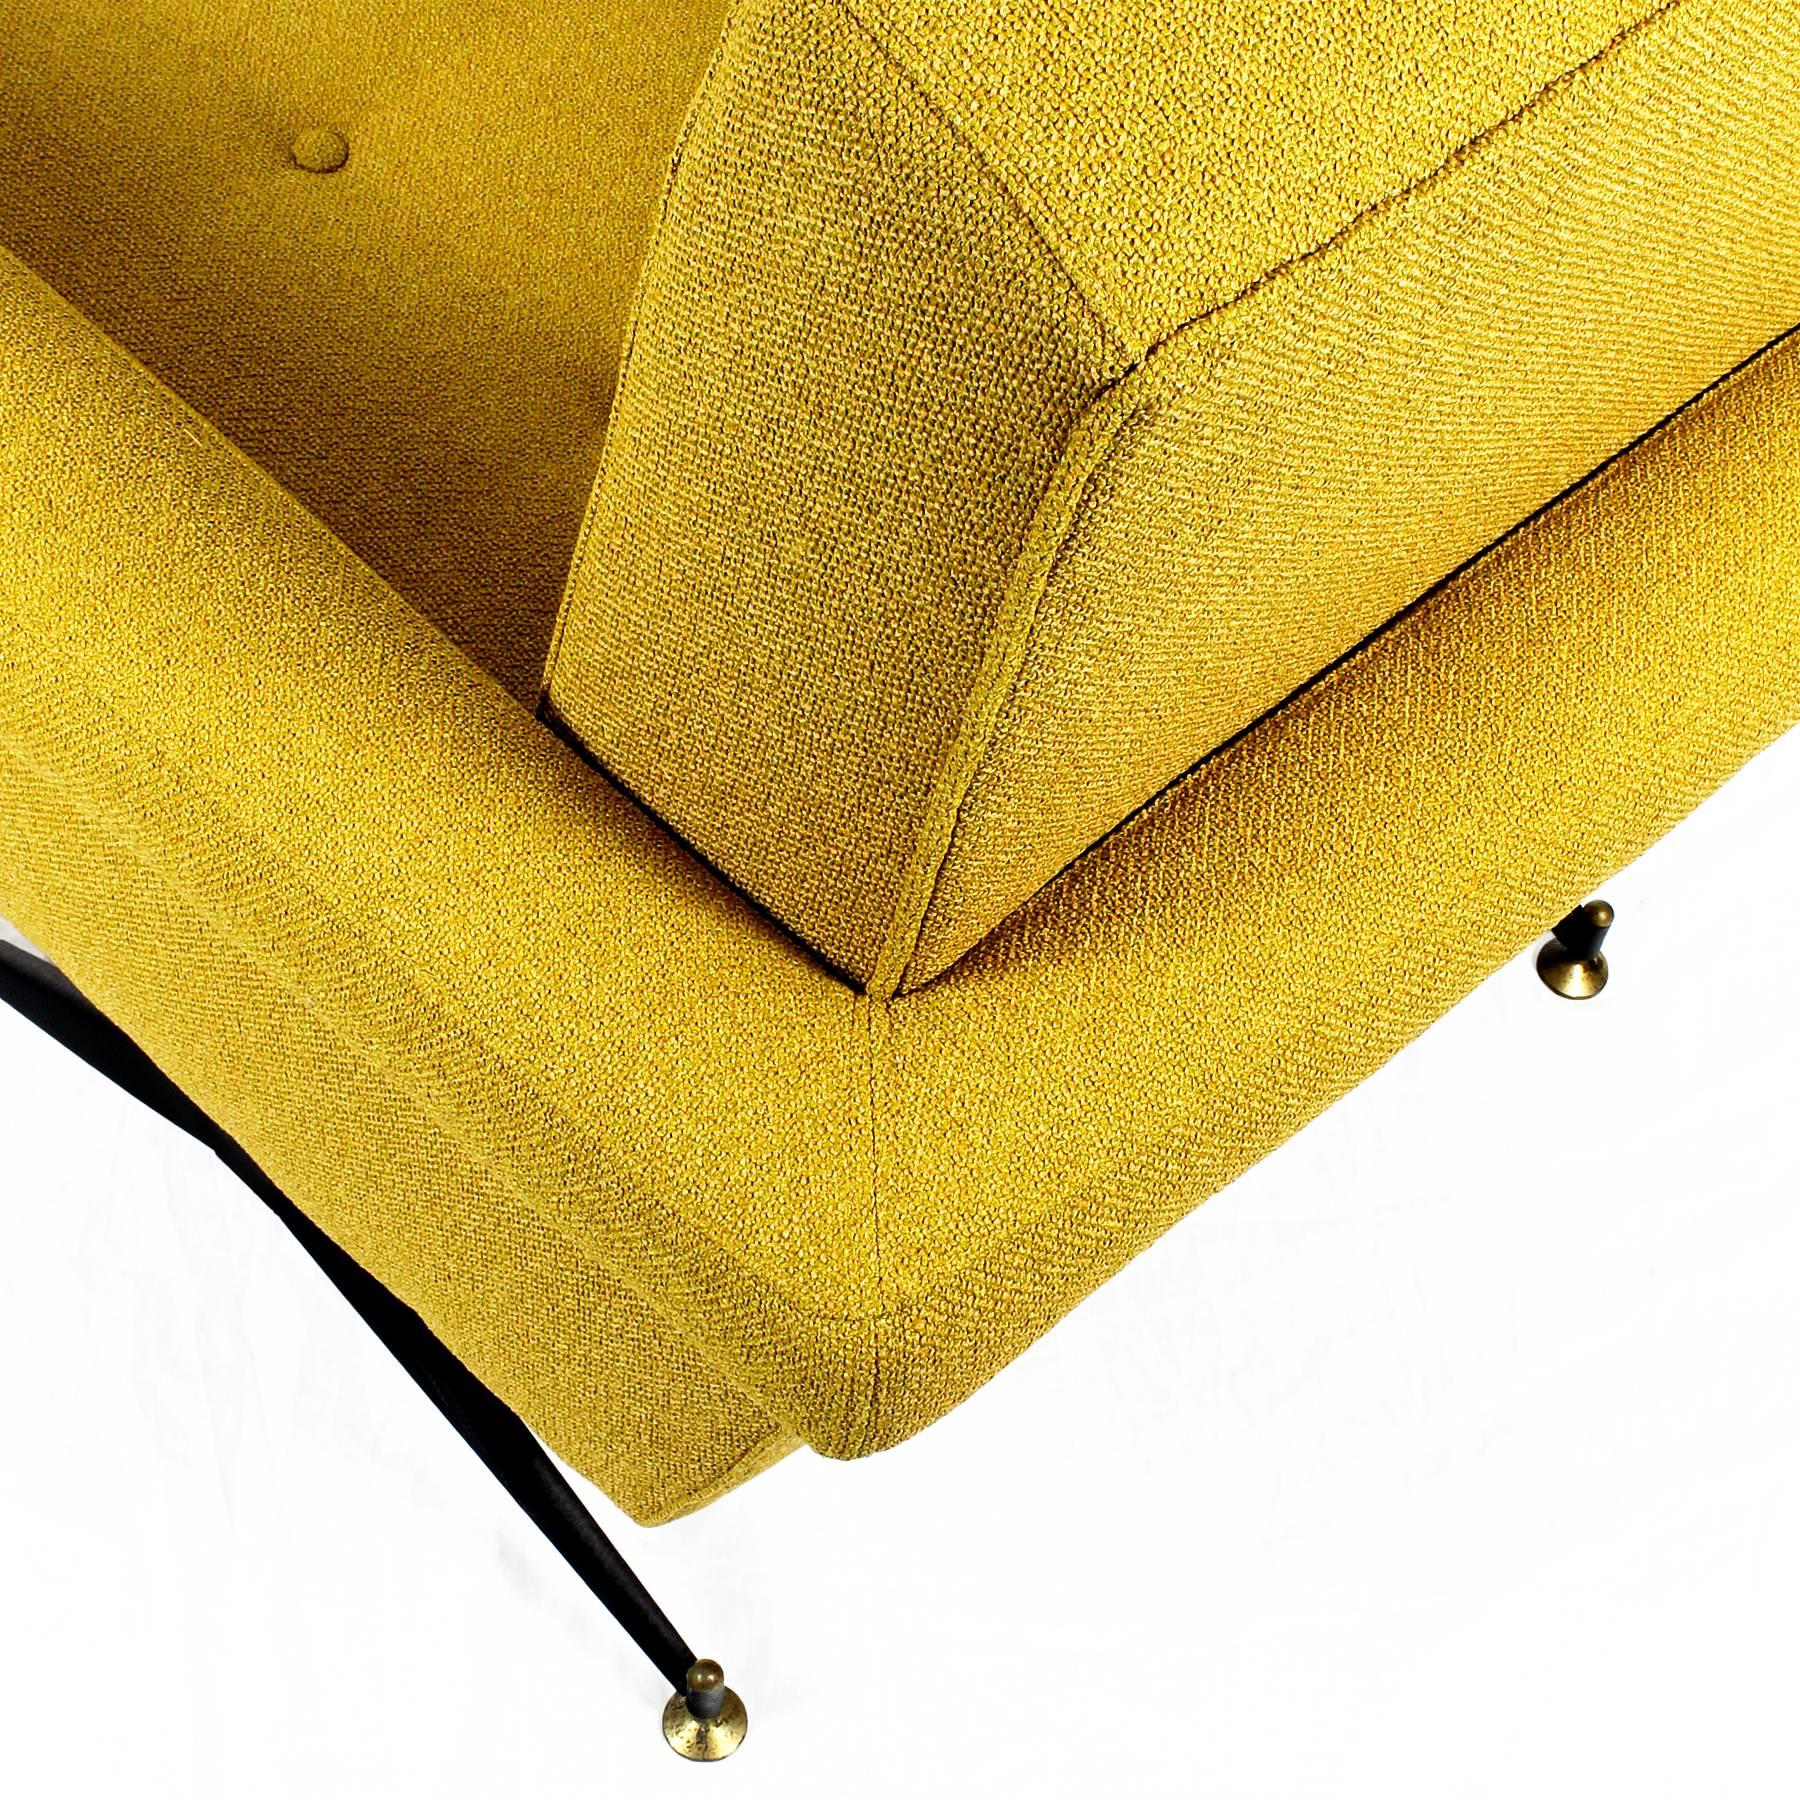 Pair of Mid-Century Modern Padded Armchairs With Yellow-Mustard Fabric - Italy For Sale 3